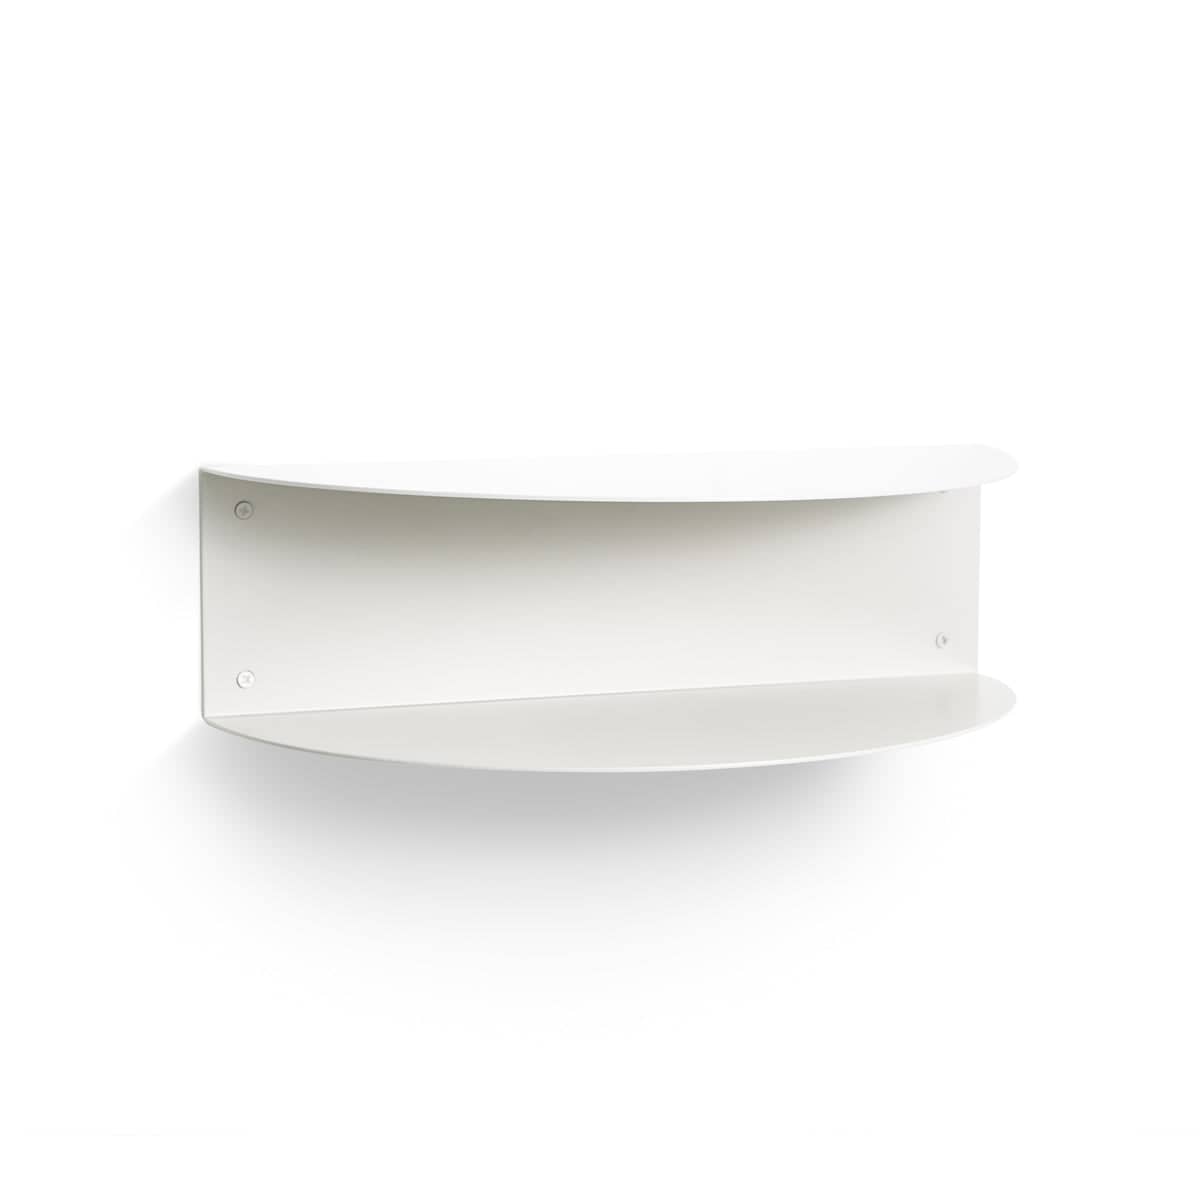 Buy Fold Hanging Bedside Table - White by Made Of Tomorrow online - RJ Living